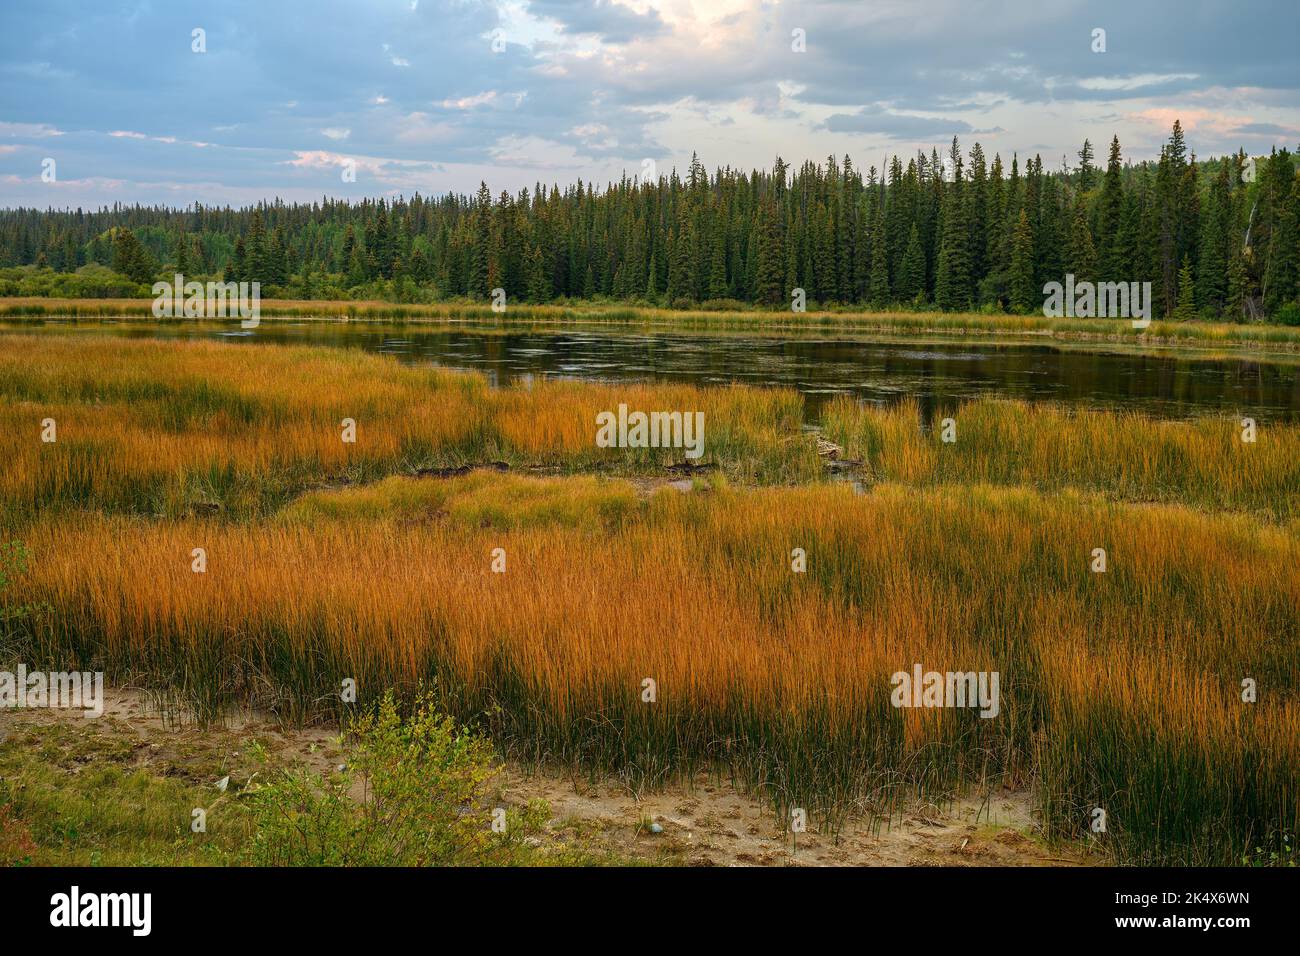 Pollywog Marshes. Very unique perspective of ponds and wetlands in Cariboo Region in British Columbia, Canada Stock Photo